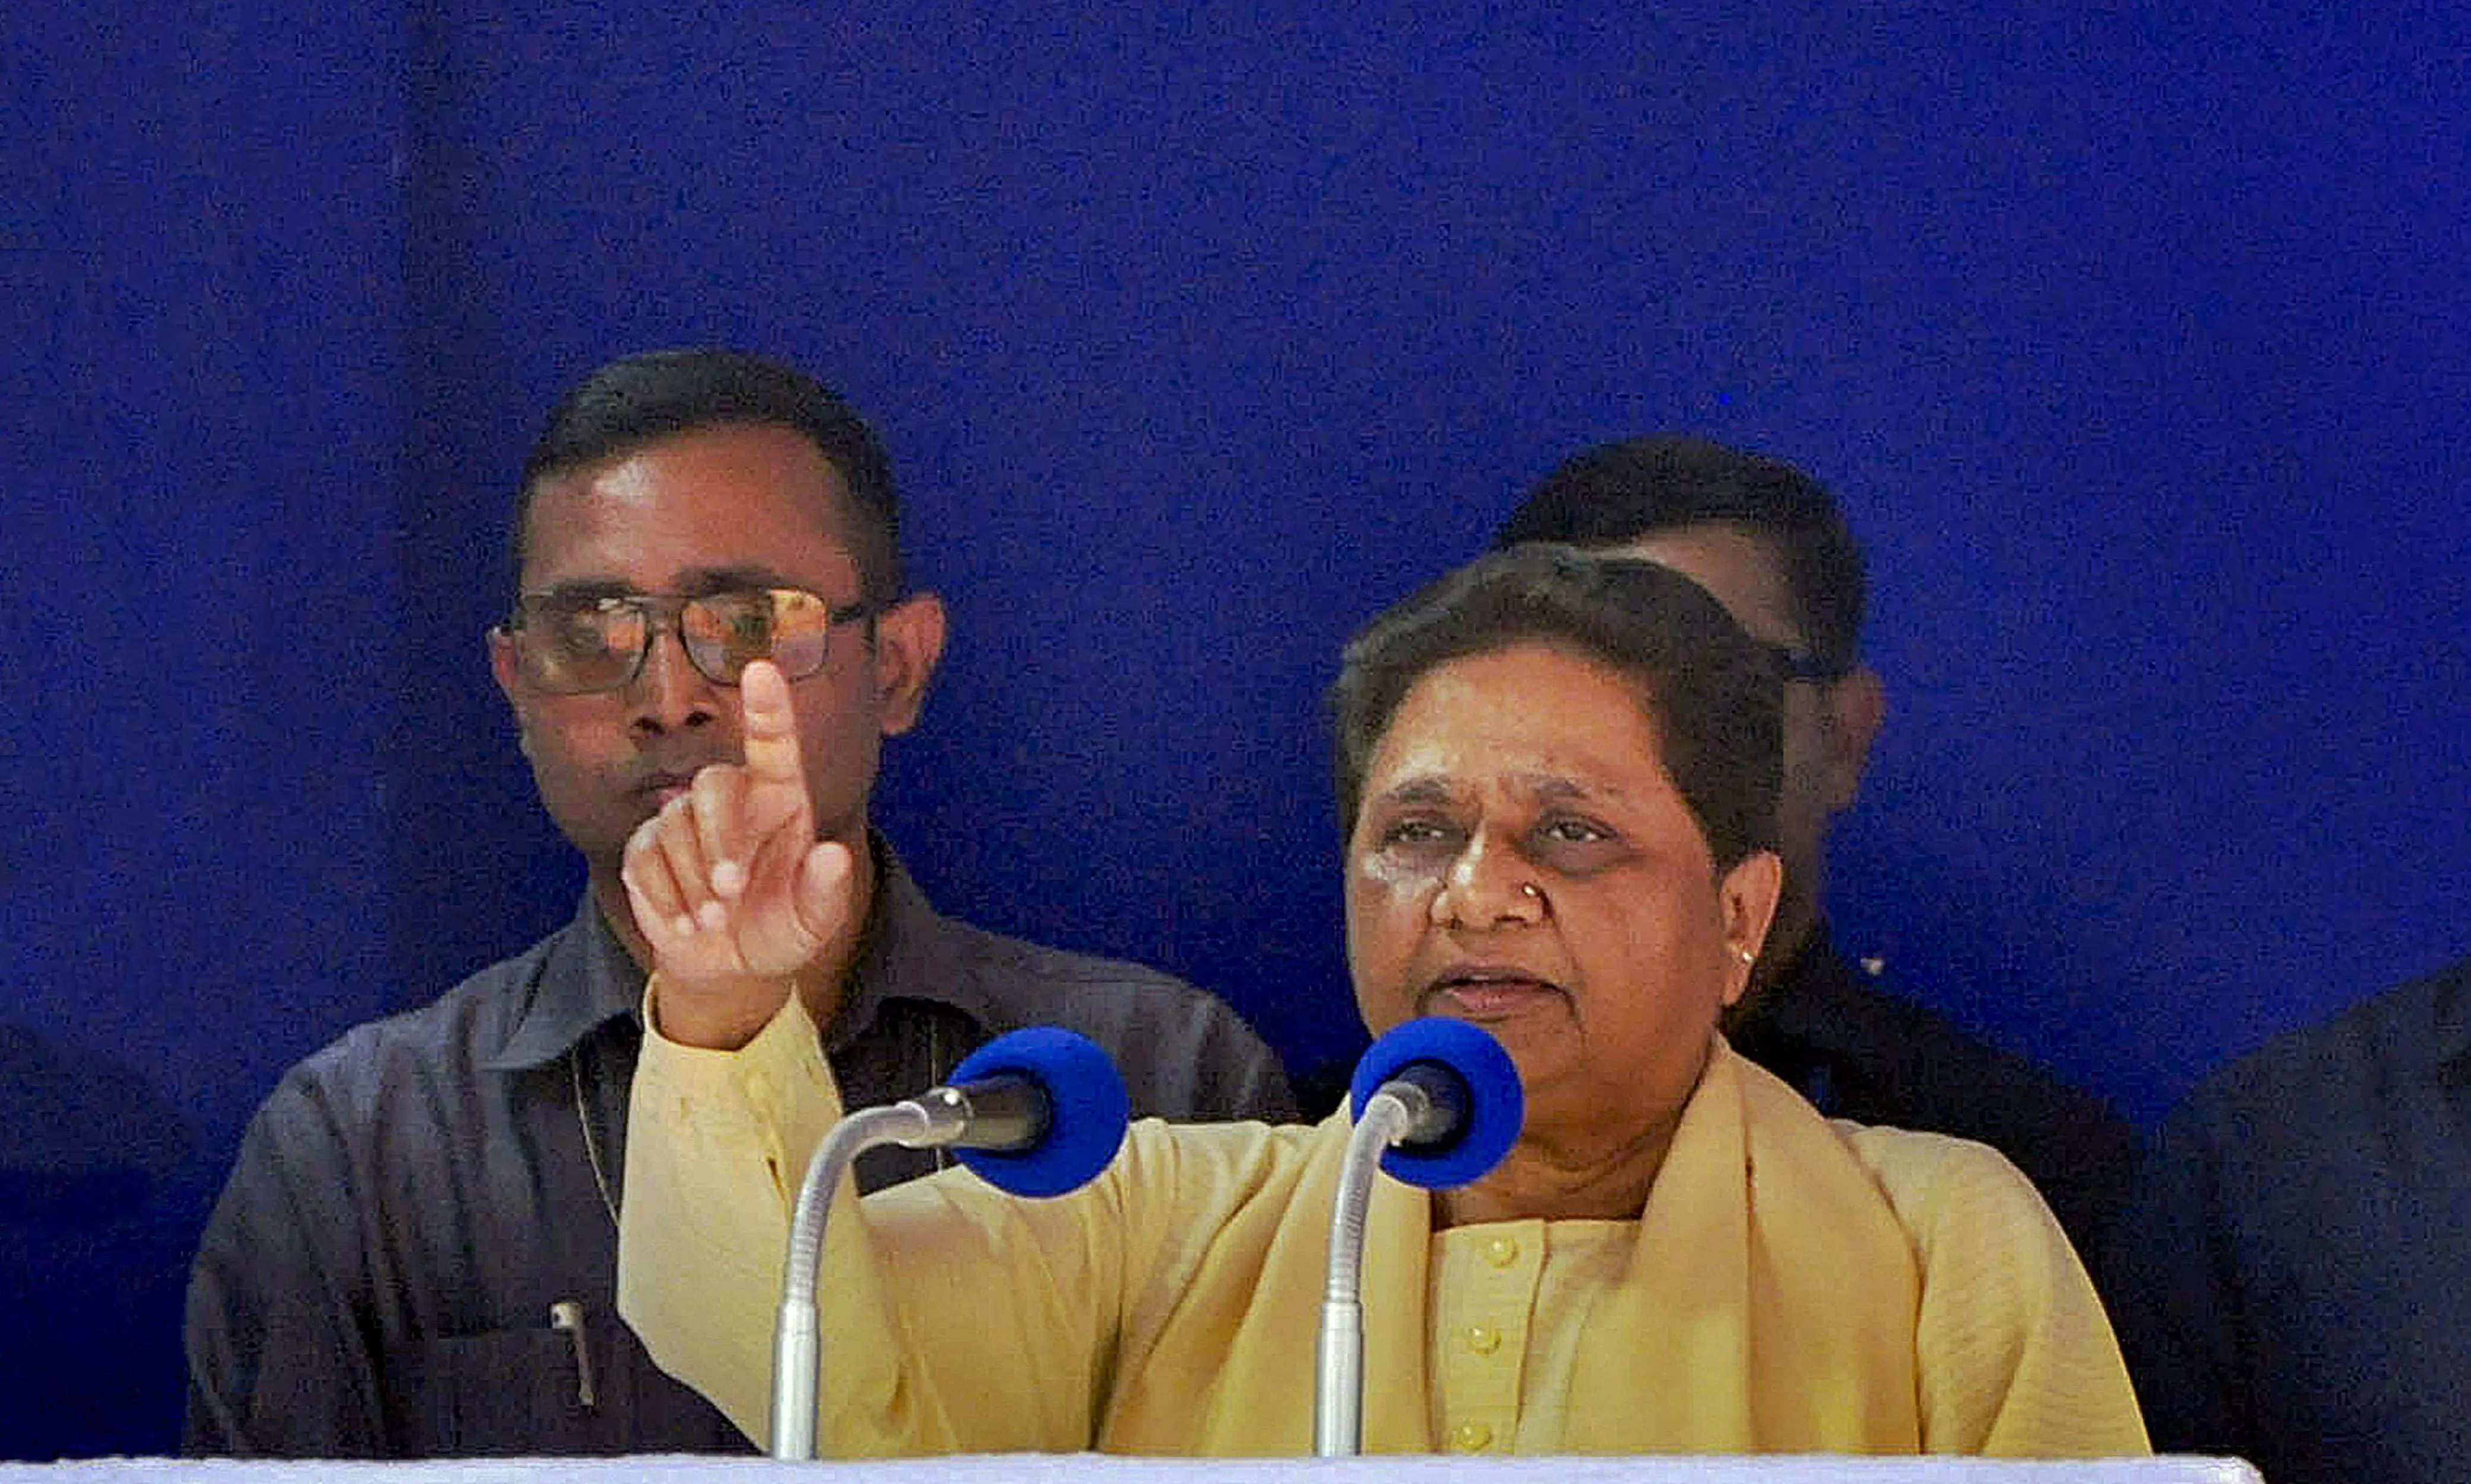 Exercise right to vote to elect pro-Bahujan govt: Mayawati